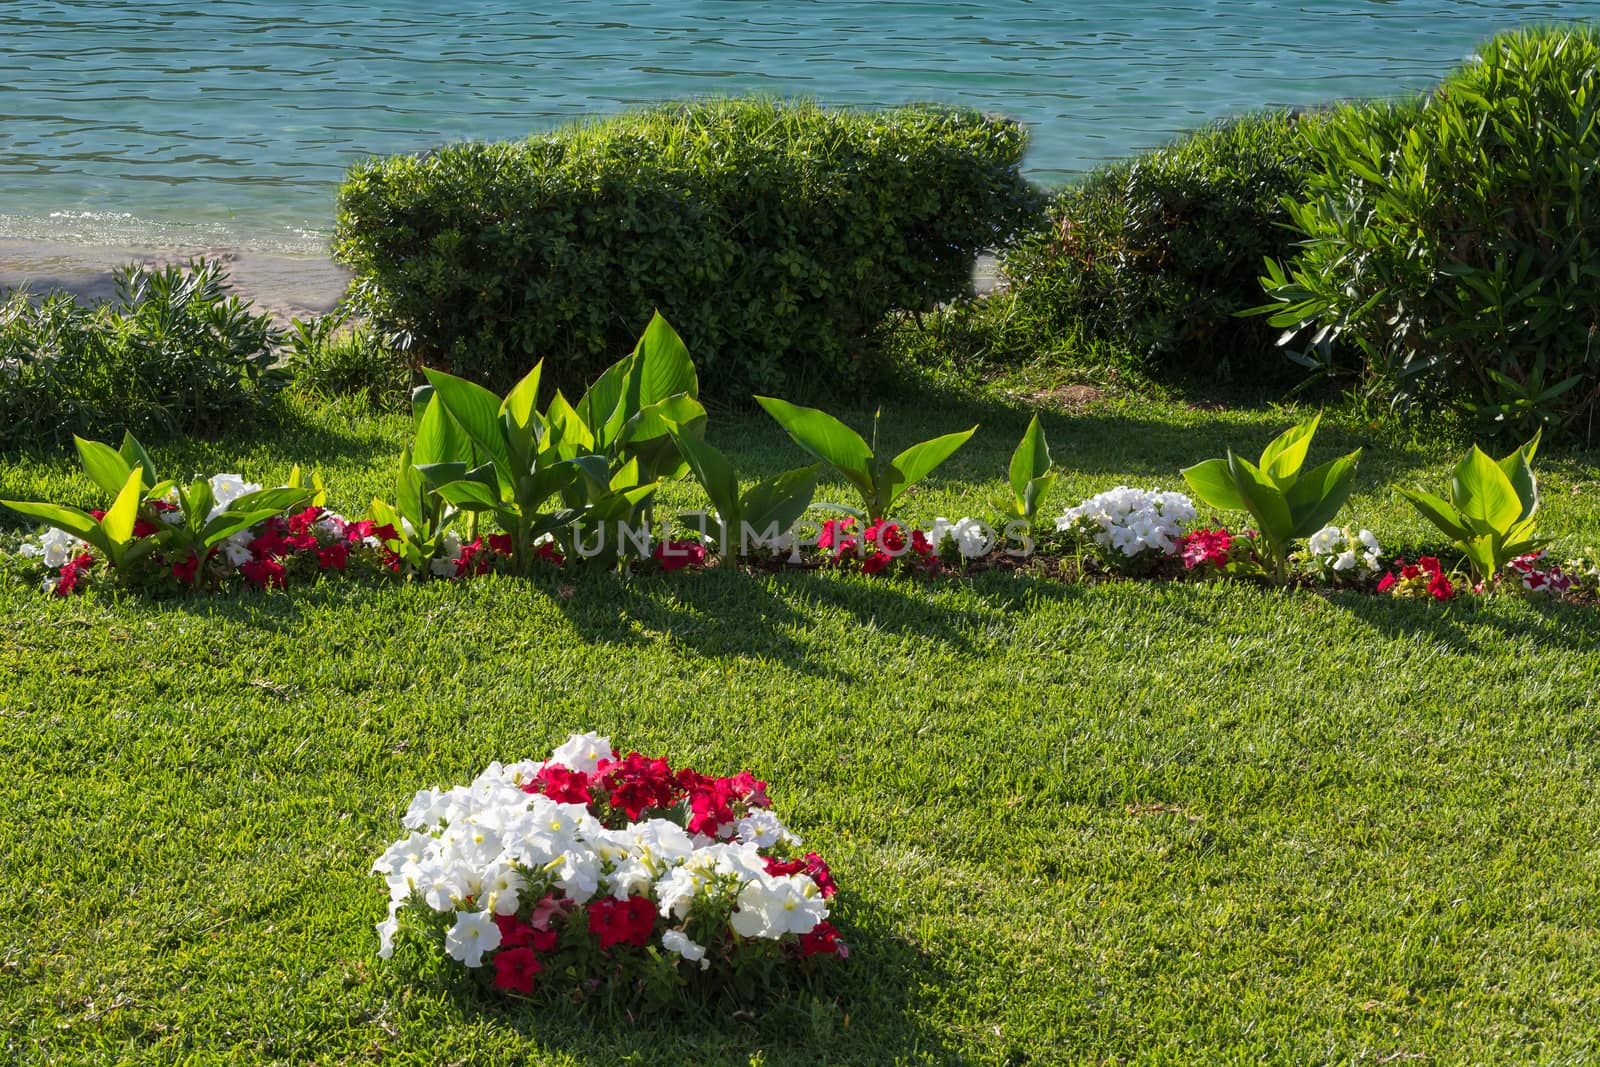 Lush flowerbeds in the summer garden. A bright sunny day. in the background the sea.